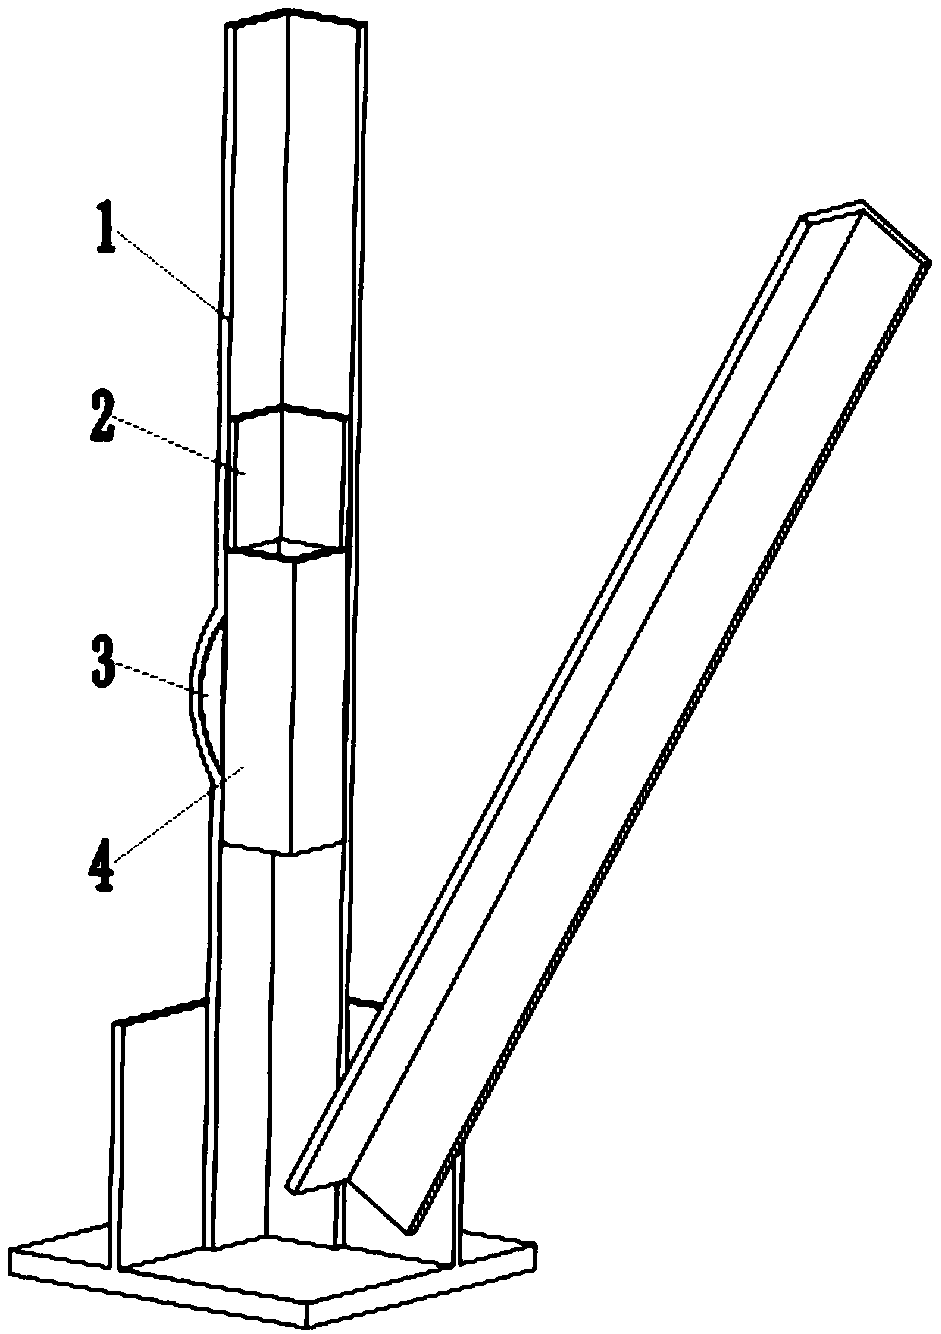 Reinforcing device and method for bending main material of tower leg of power transmission angle steel tower